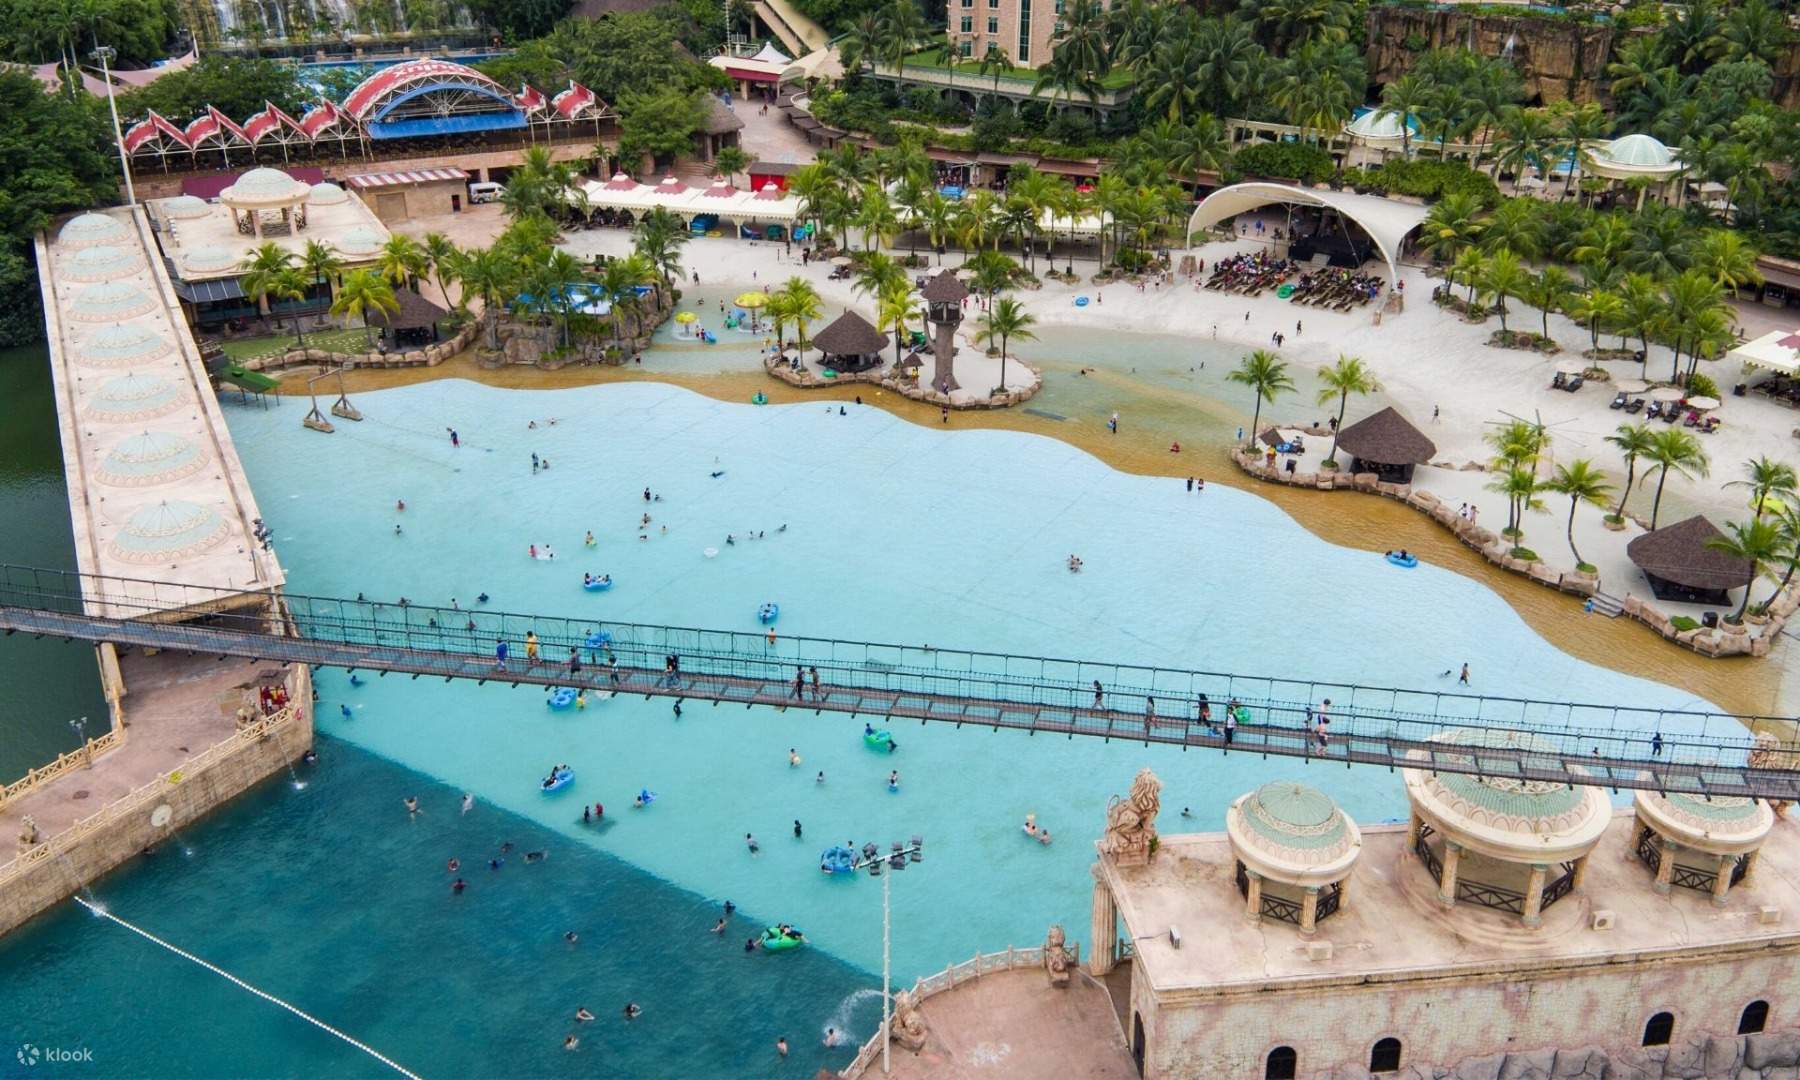 Sunway Lagoon, a water theme park tourist attraction in Malaysia